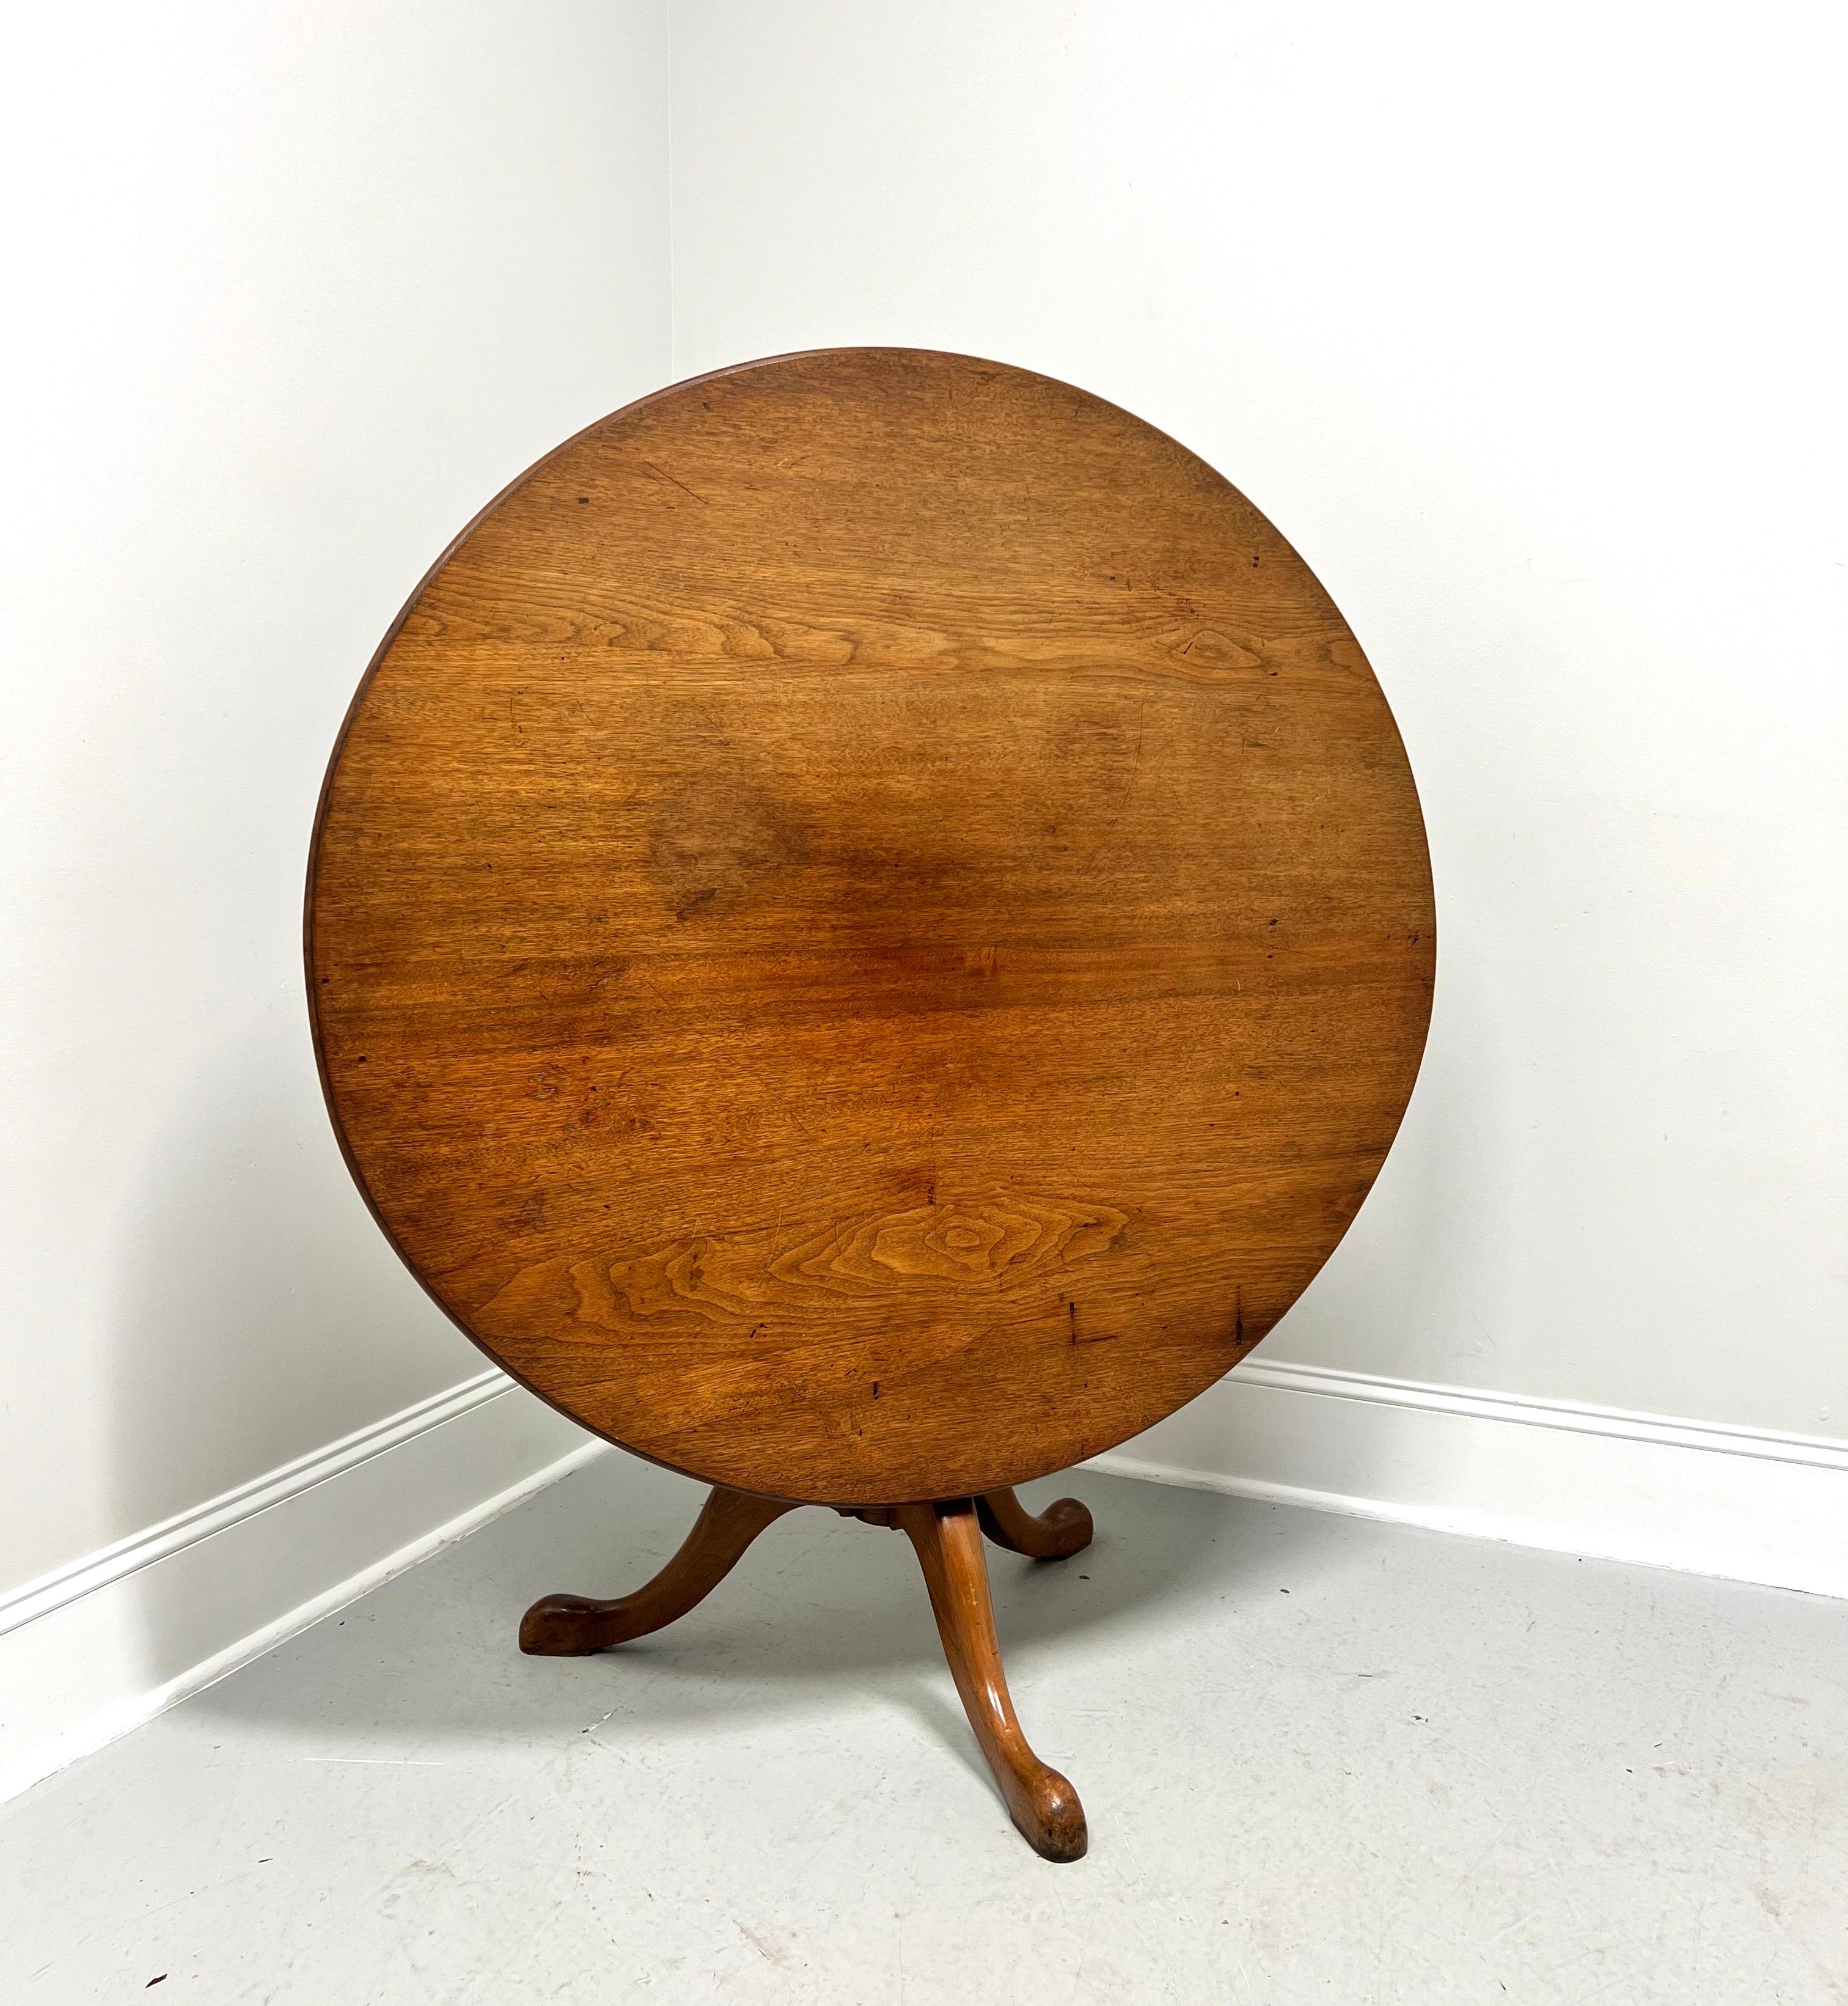 An antique 19th Century Queen Anne style tilt-top dining table, unbranded. Solid walnut, round top with bevel edge, tilts up on pivots, walnut slide latch, turned pedestal, three legs, and pad feet. Made in the USA.

Measures:  Table Top Down: 47.5w